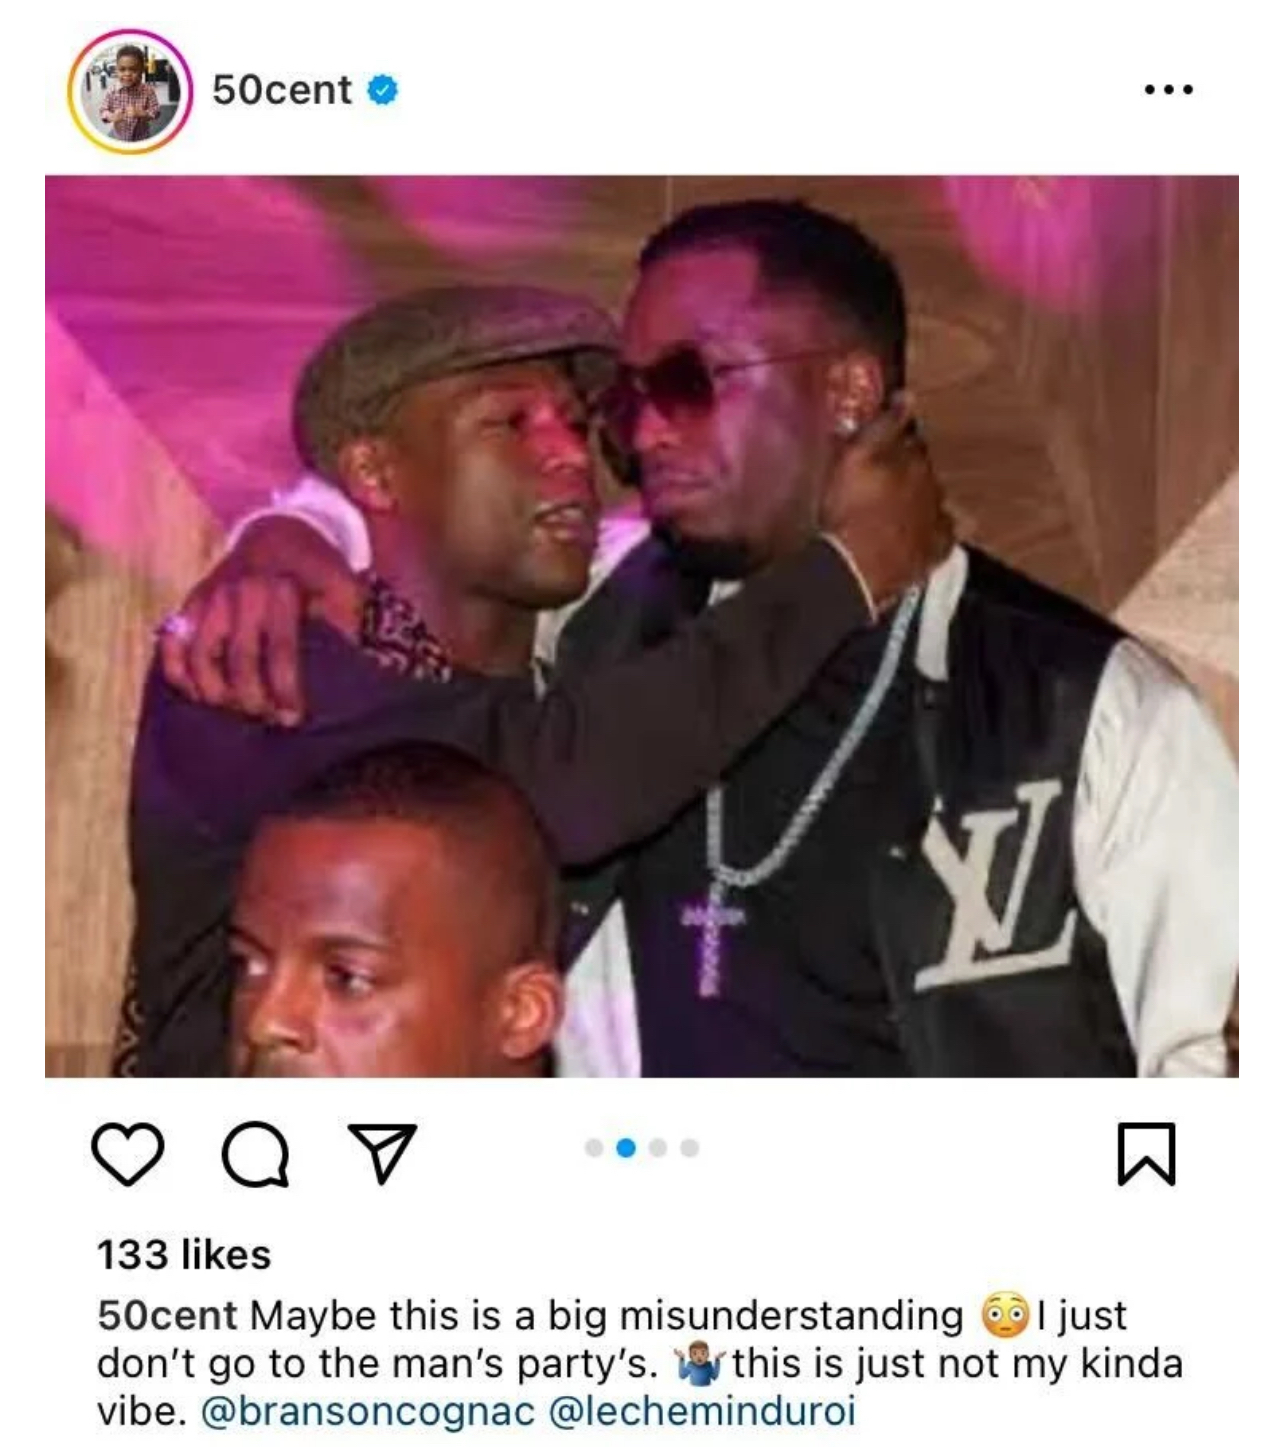 Diddy in a varsity jacket, hugging a man, both smiling, with onlookers. Used in music context